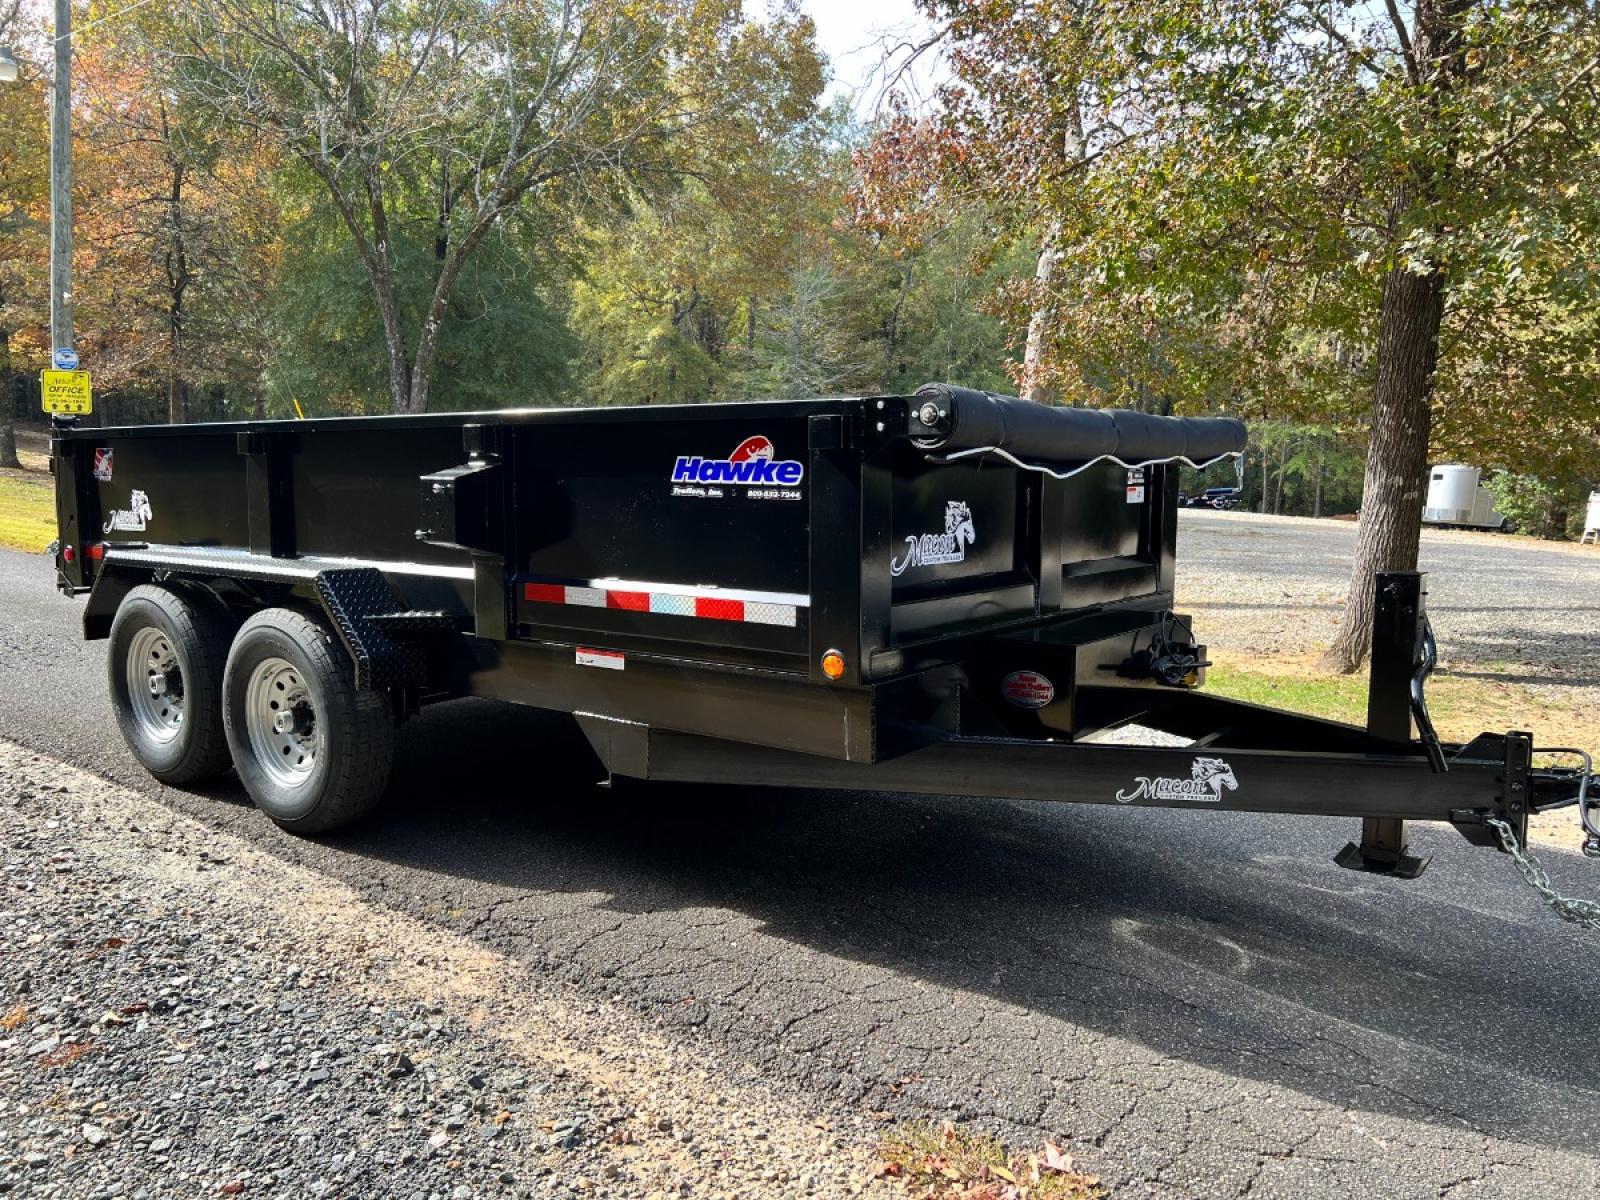 2022 Black Hawke 7ft X 14ft Tandem , located at 1330 Rainey Rd., Macon, 31220, (478) 960-1044, 32.845638, -83.778687 - Brand New 6 Ton 2022 Model Hawke Brand, 7ft X 14ft Dump Trailer! Hawke Dump Trailers are Really Awesome & Heavy Duty! This Fantastic Quality is Seen Everywhere You Look! 24" Tall Solid Steel Plate Walls are Heavy Duty! Full Length Heavy Duty Tarp! 6 Ton Total Capacity, or 12,000lbs! This Fanta - Photo #0